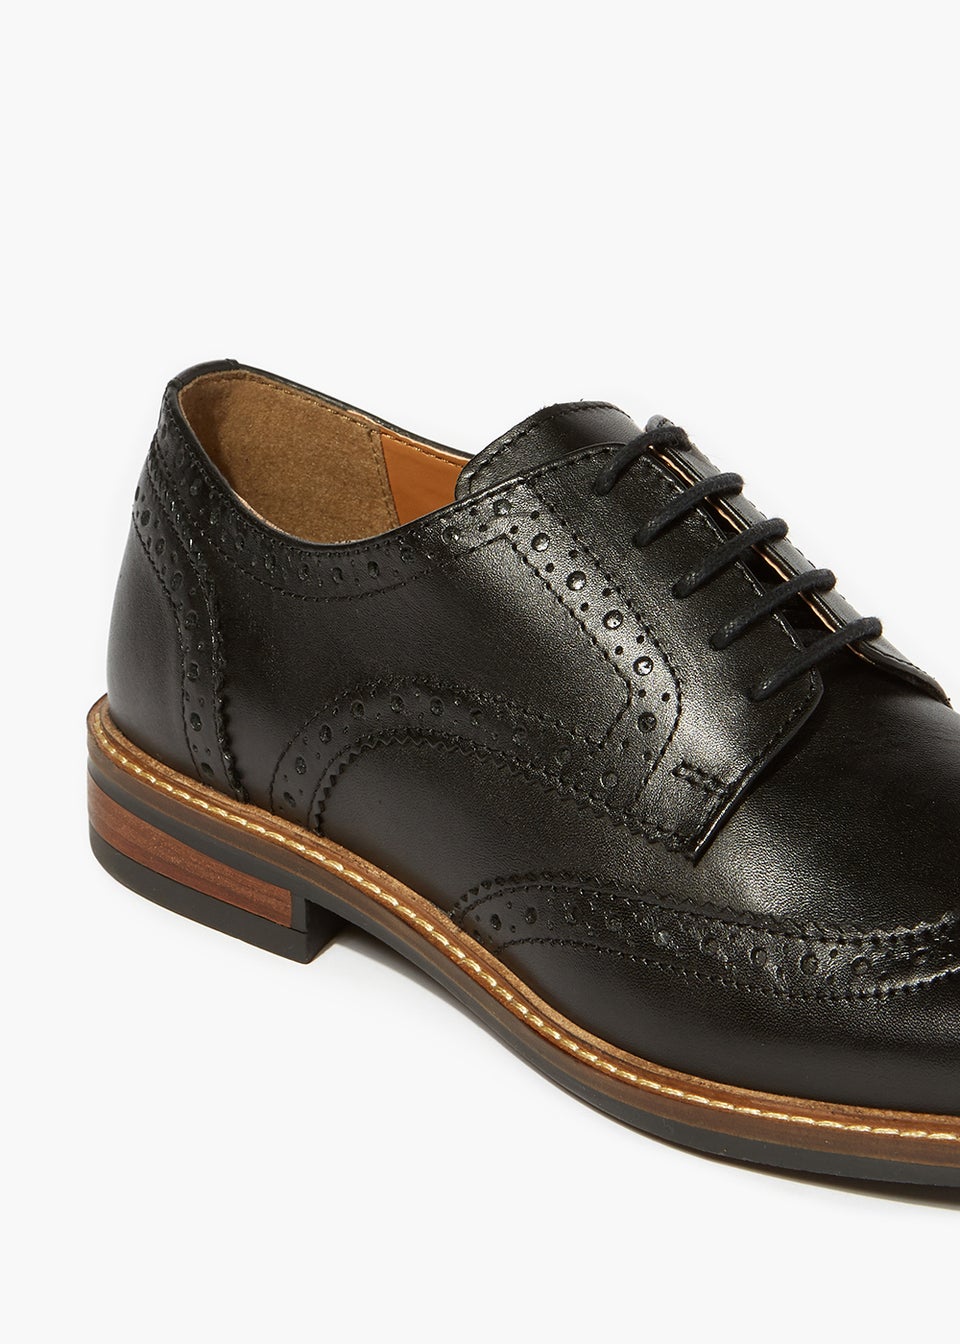 Black Leather Formal Brogues